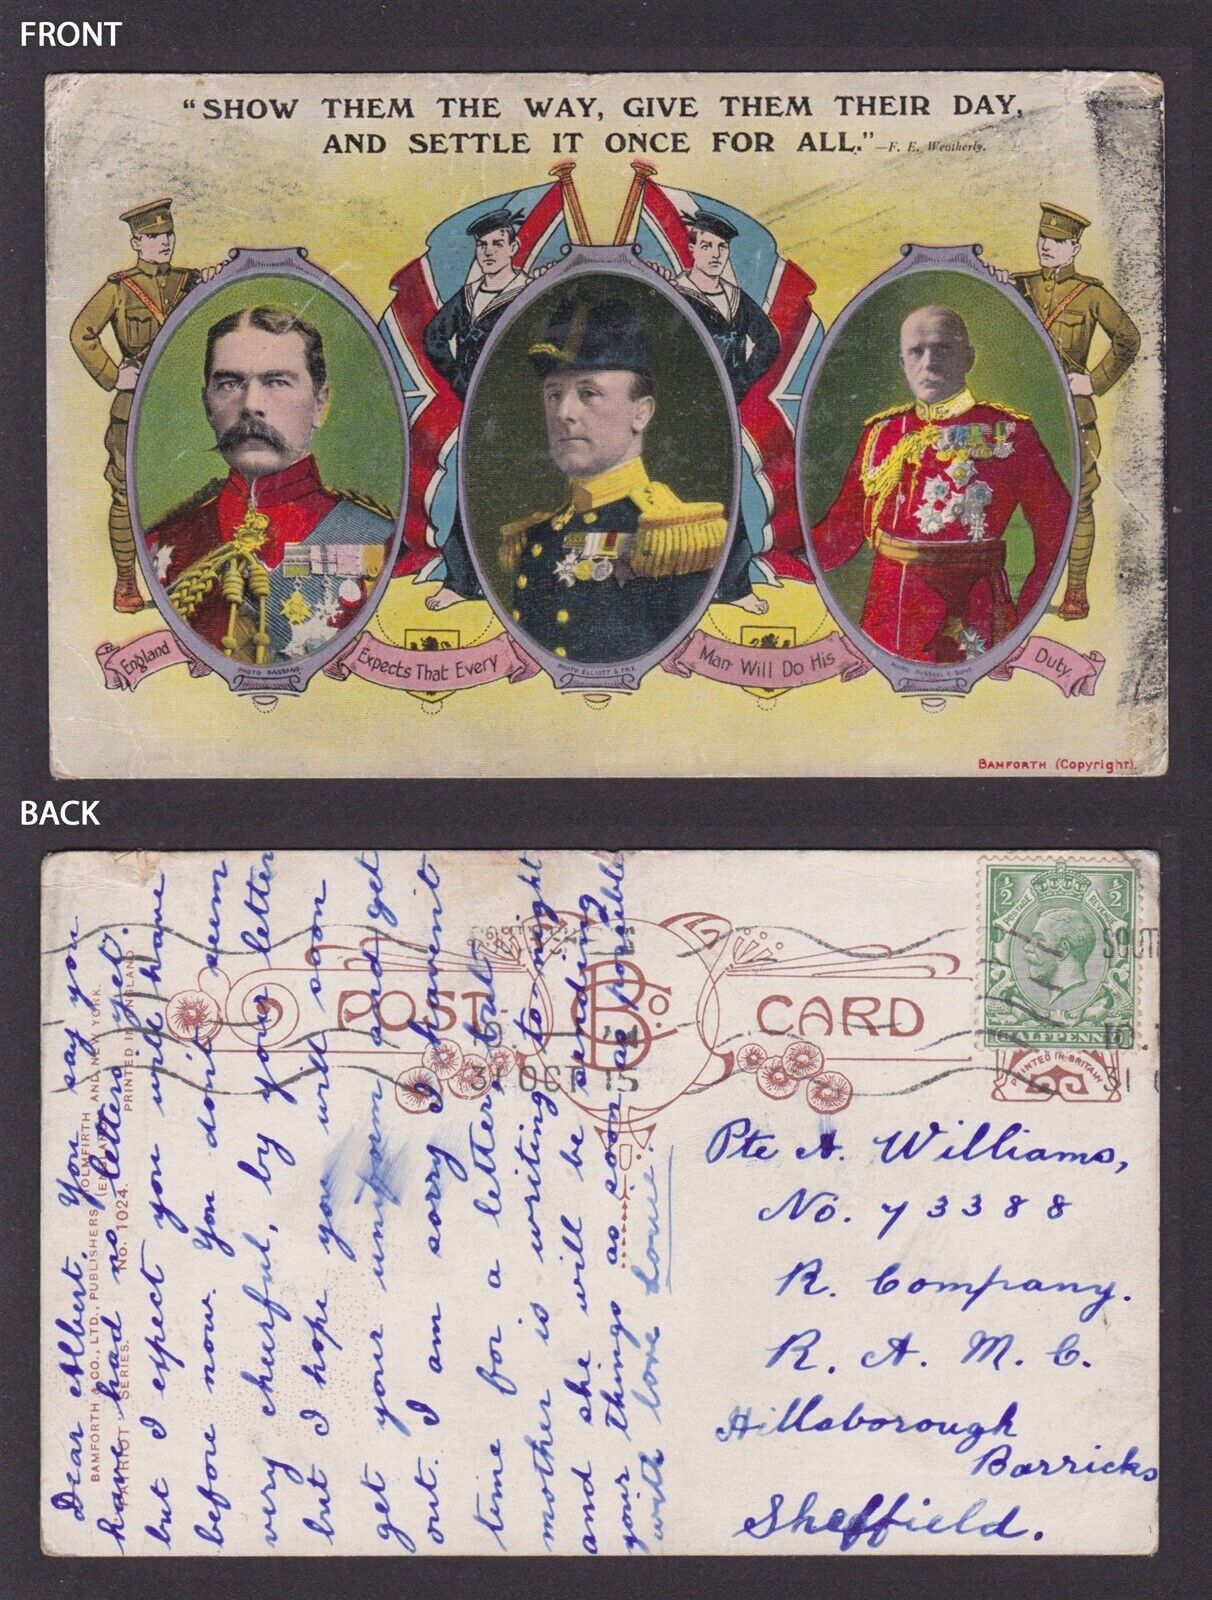 GREAT BRITAIN 1915, Postcard, Show them the way, give them their day, Propaganda